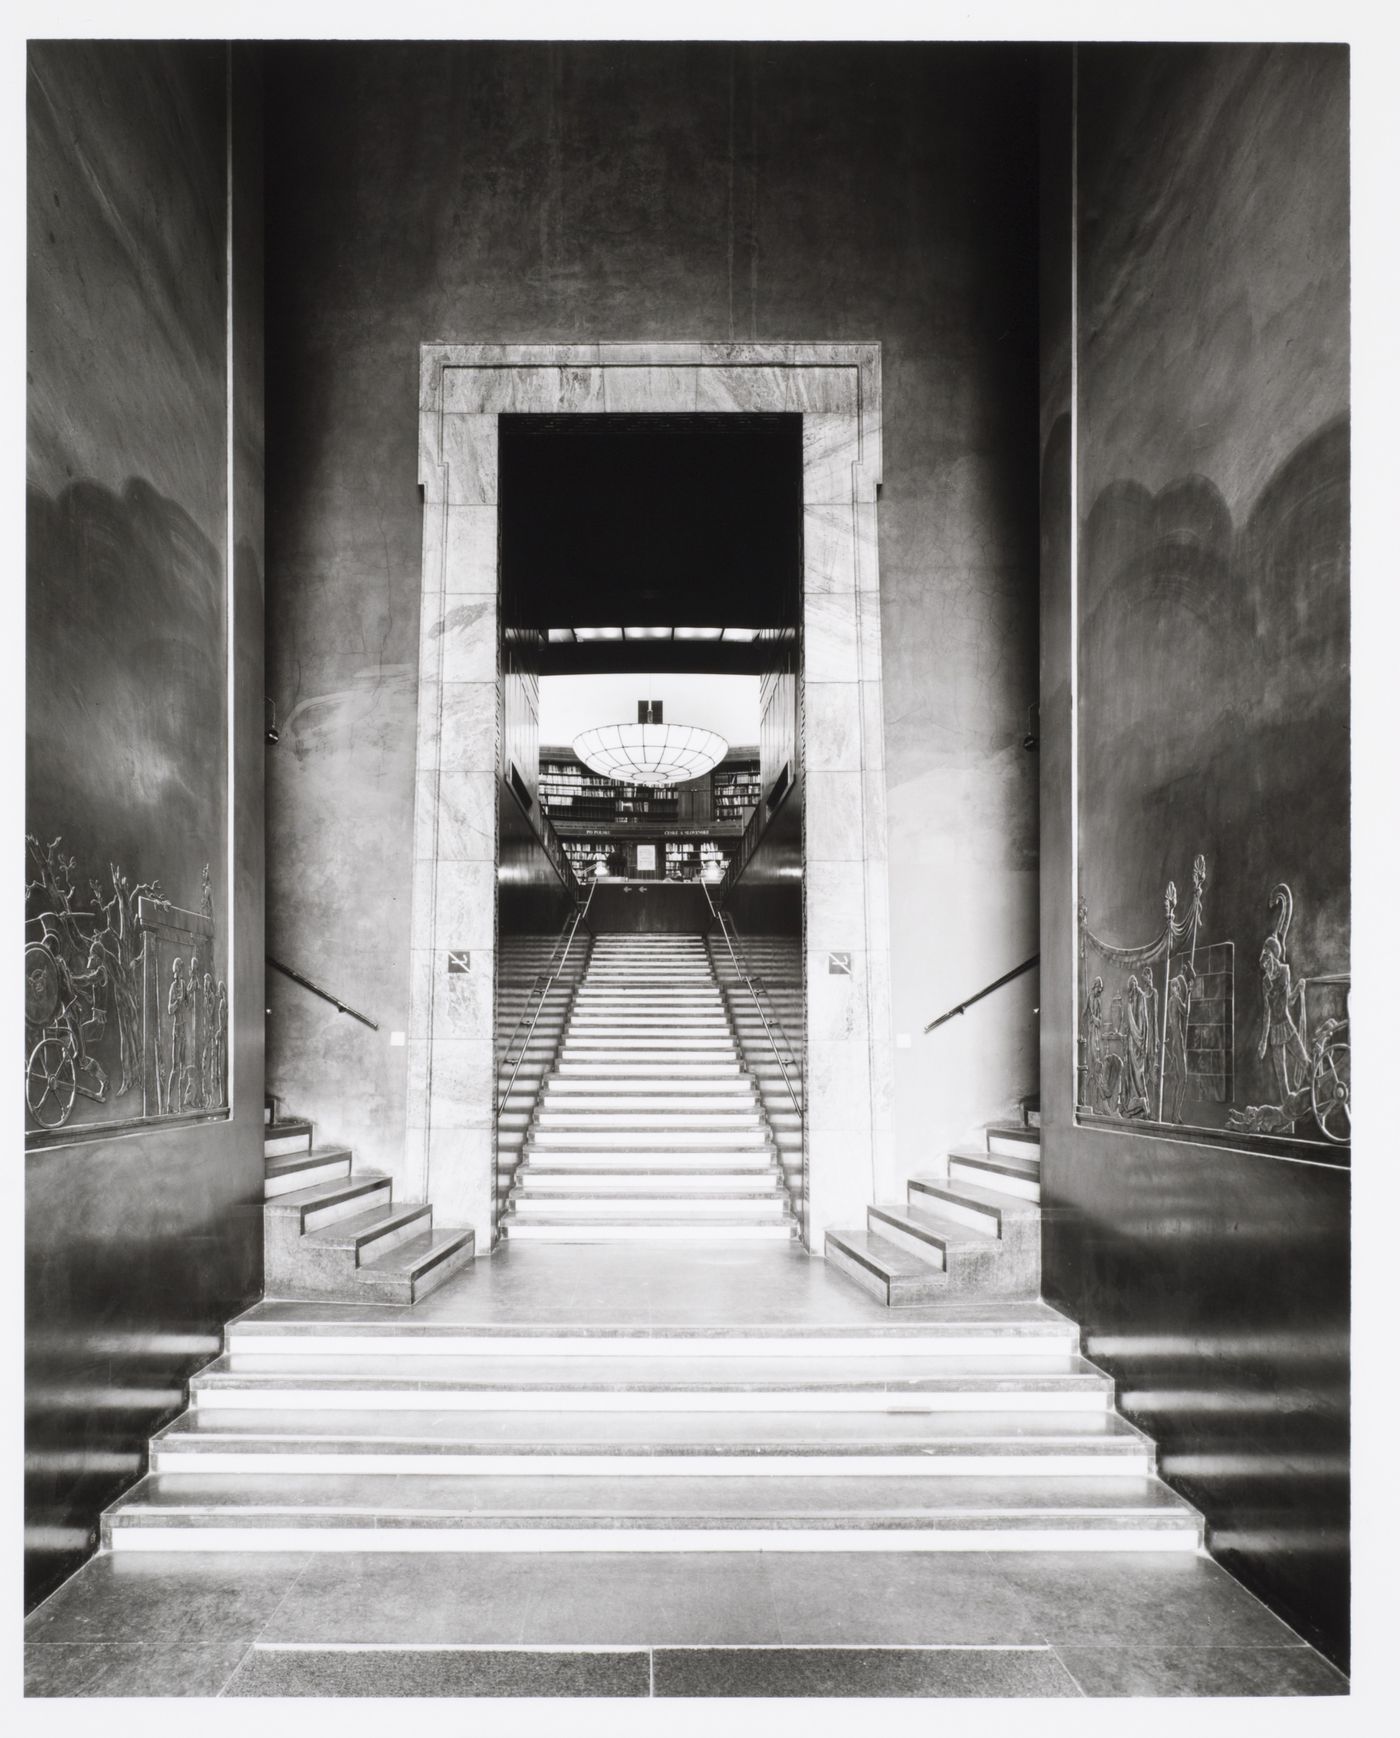 Interior view of the stairs leading from the lobby to the lending hall of Stockholm Public Library showing the bas-reliefs depicting scenes from the Iliad sculpted by Ivar Viktor Johnsson, 51-55 Odengatan, Stockholm, Sweden